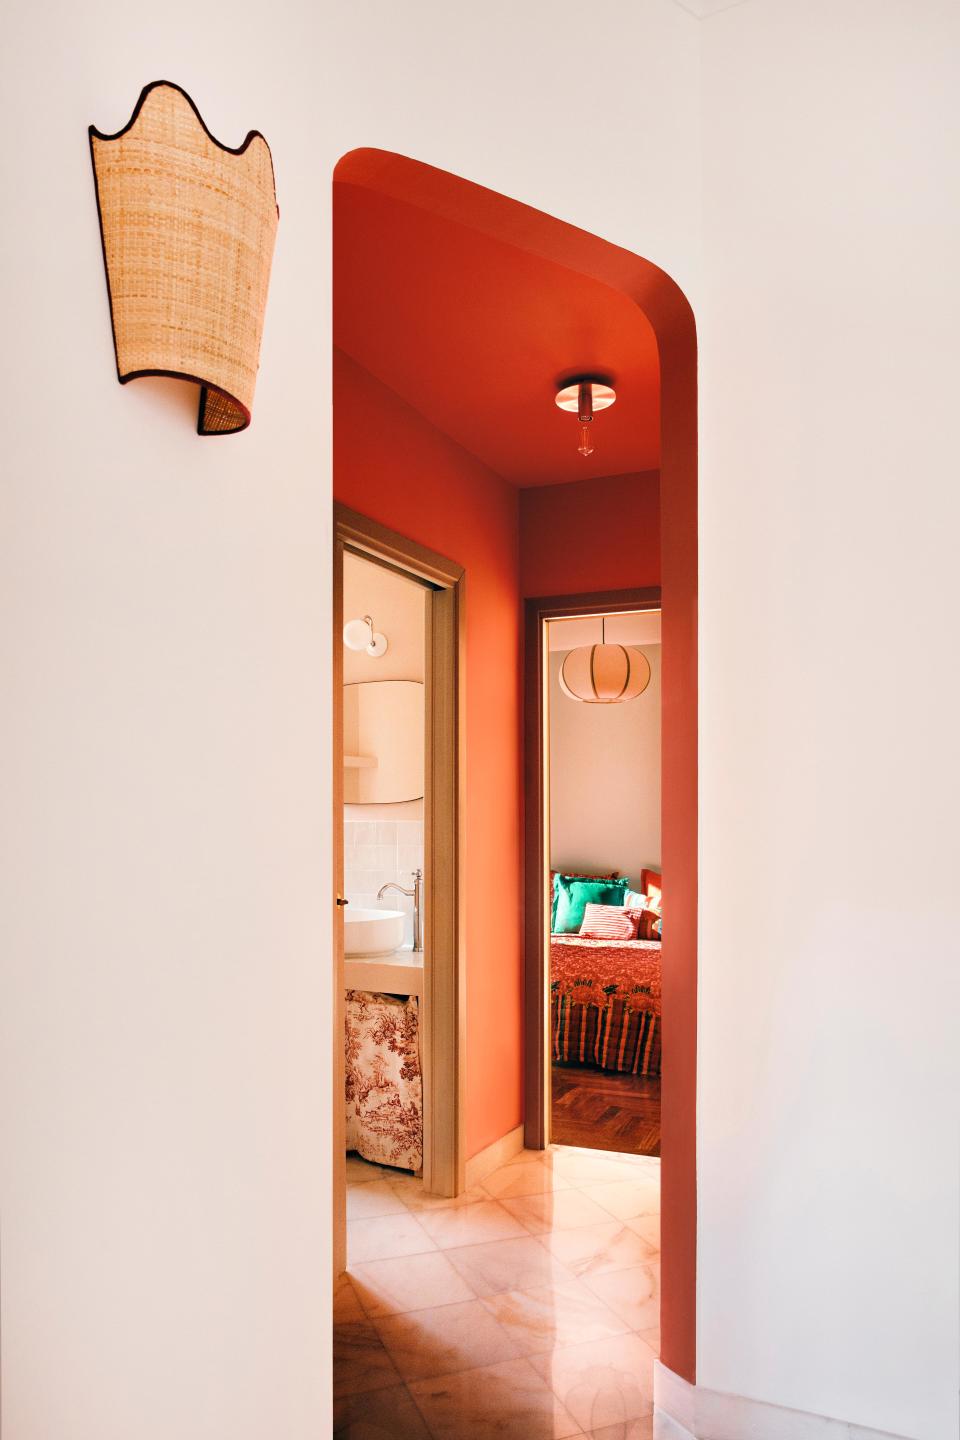 Curves and color add warmth and visual interest throughout the small apartment.